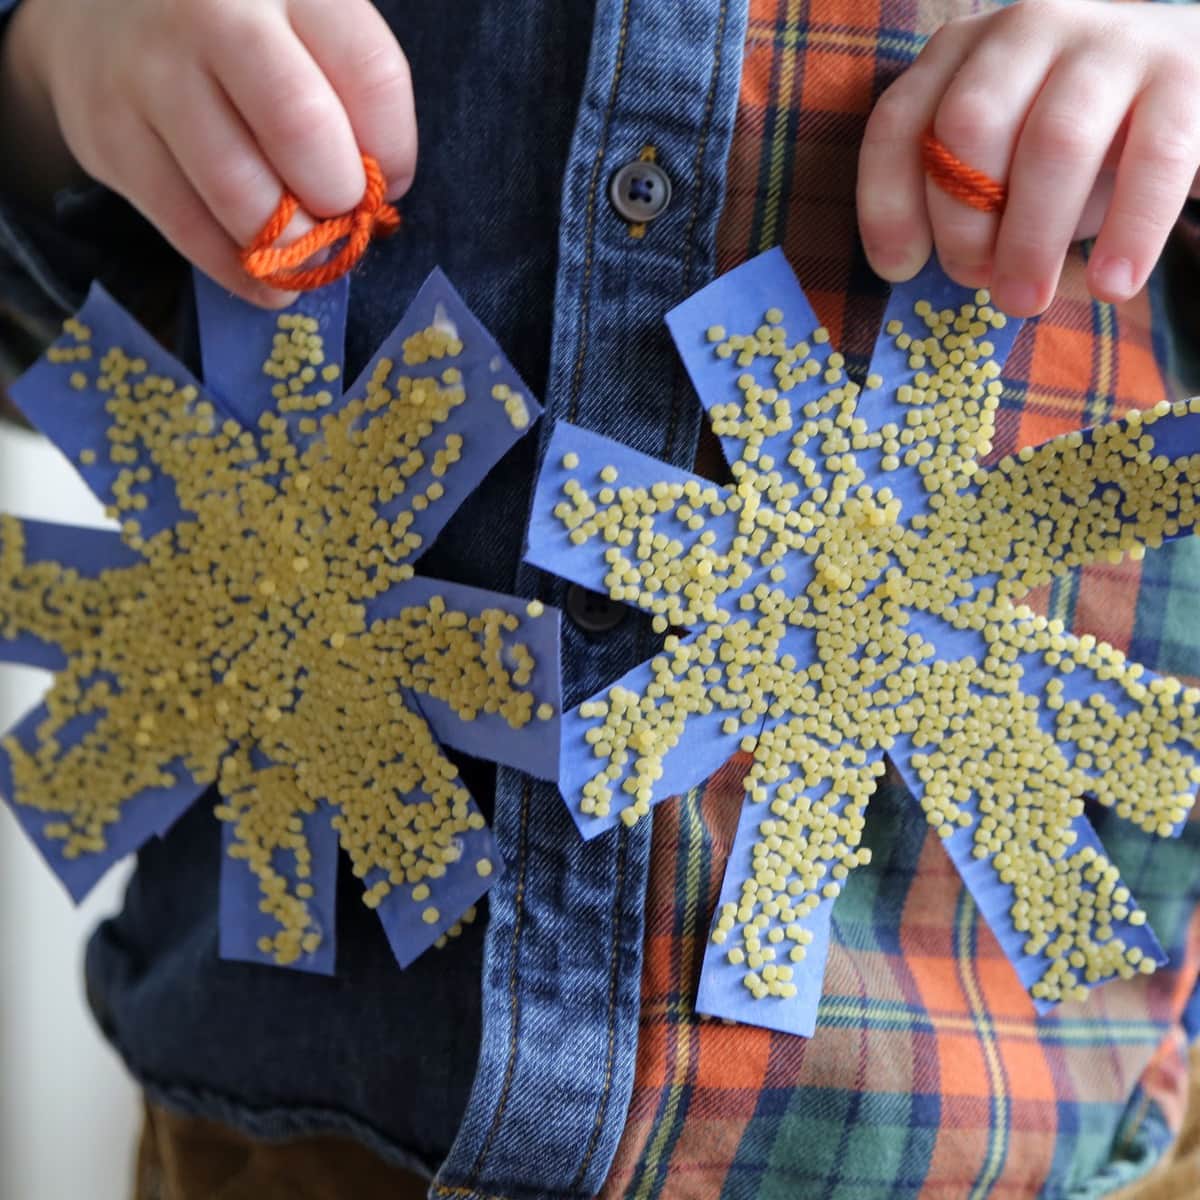 Easy Snowflake Craft for Kids to Make